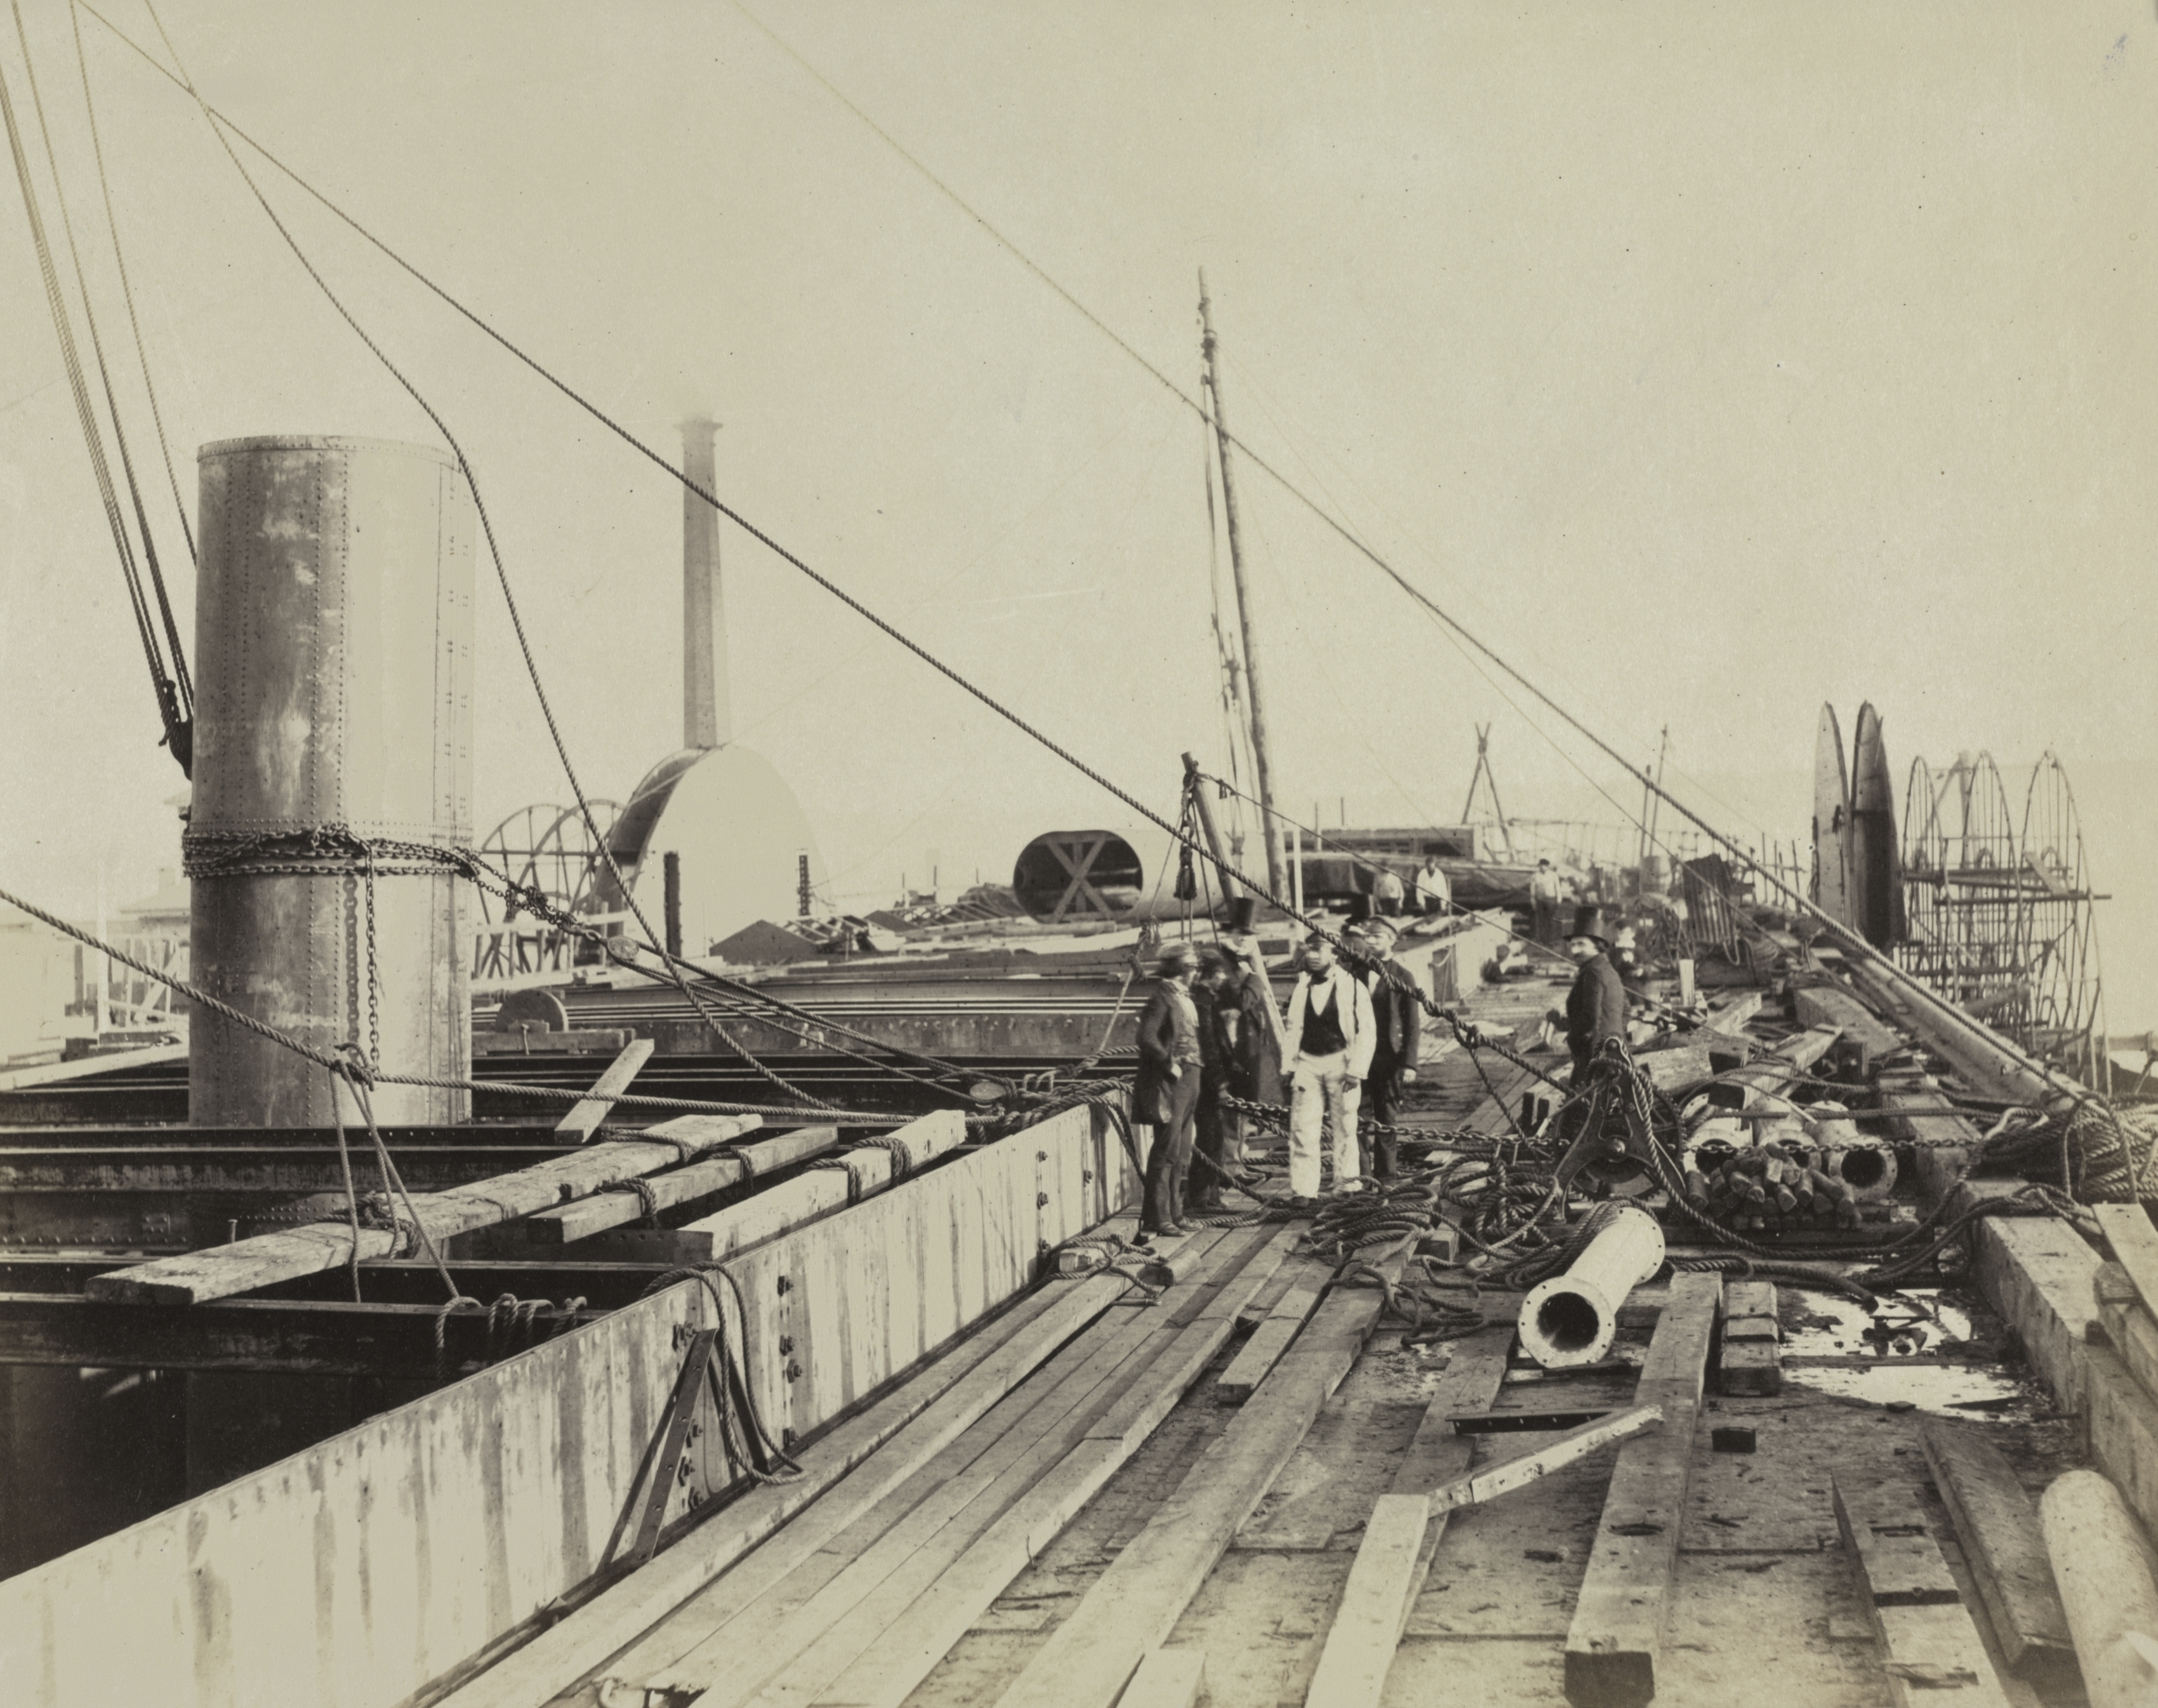 Deck Scene of the Great Eastern